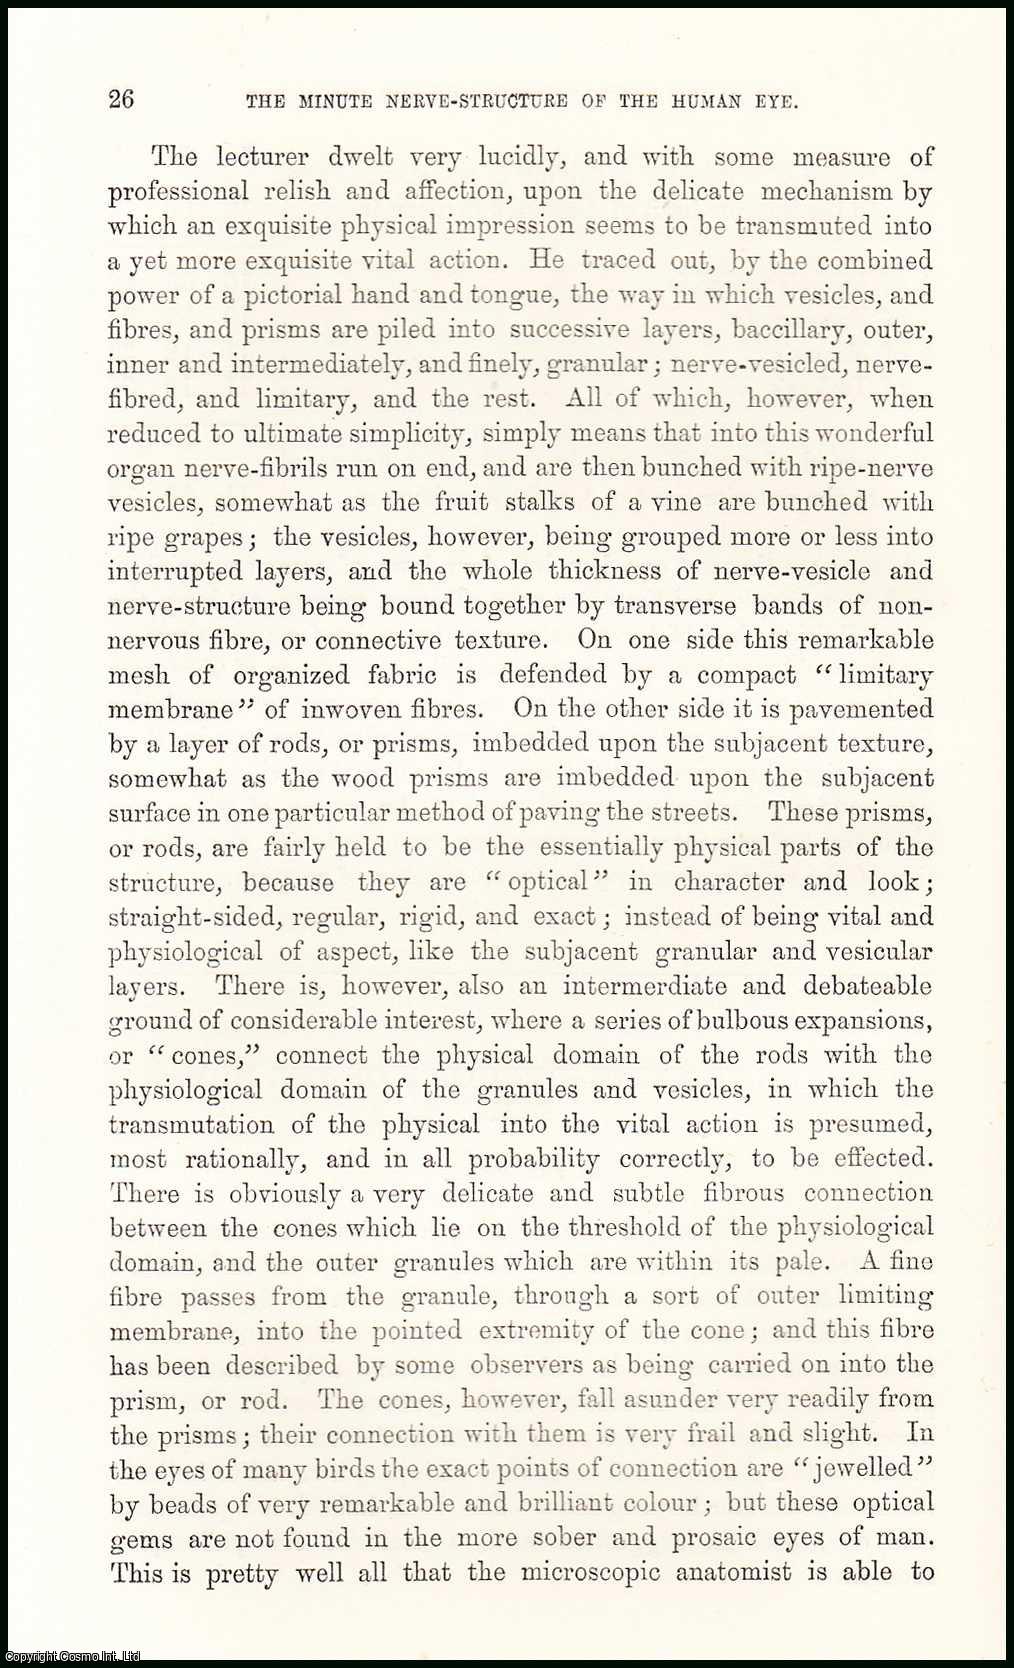 Dr. Mann - The Minute Nerve-Structure of the Human Eye. An uncommon original article from the Student and Intellectual Observer of Science Literature & Art, 1870.